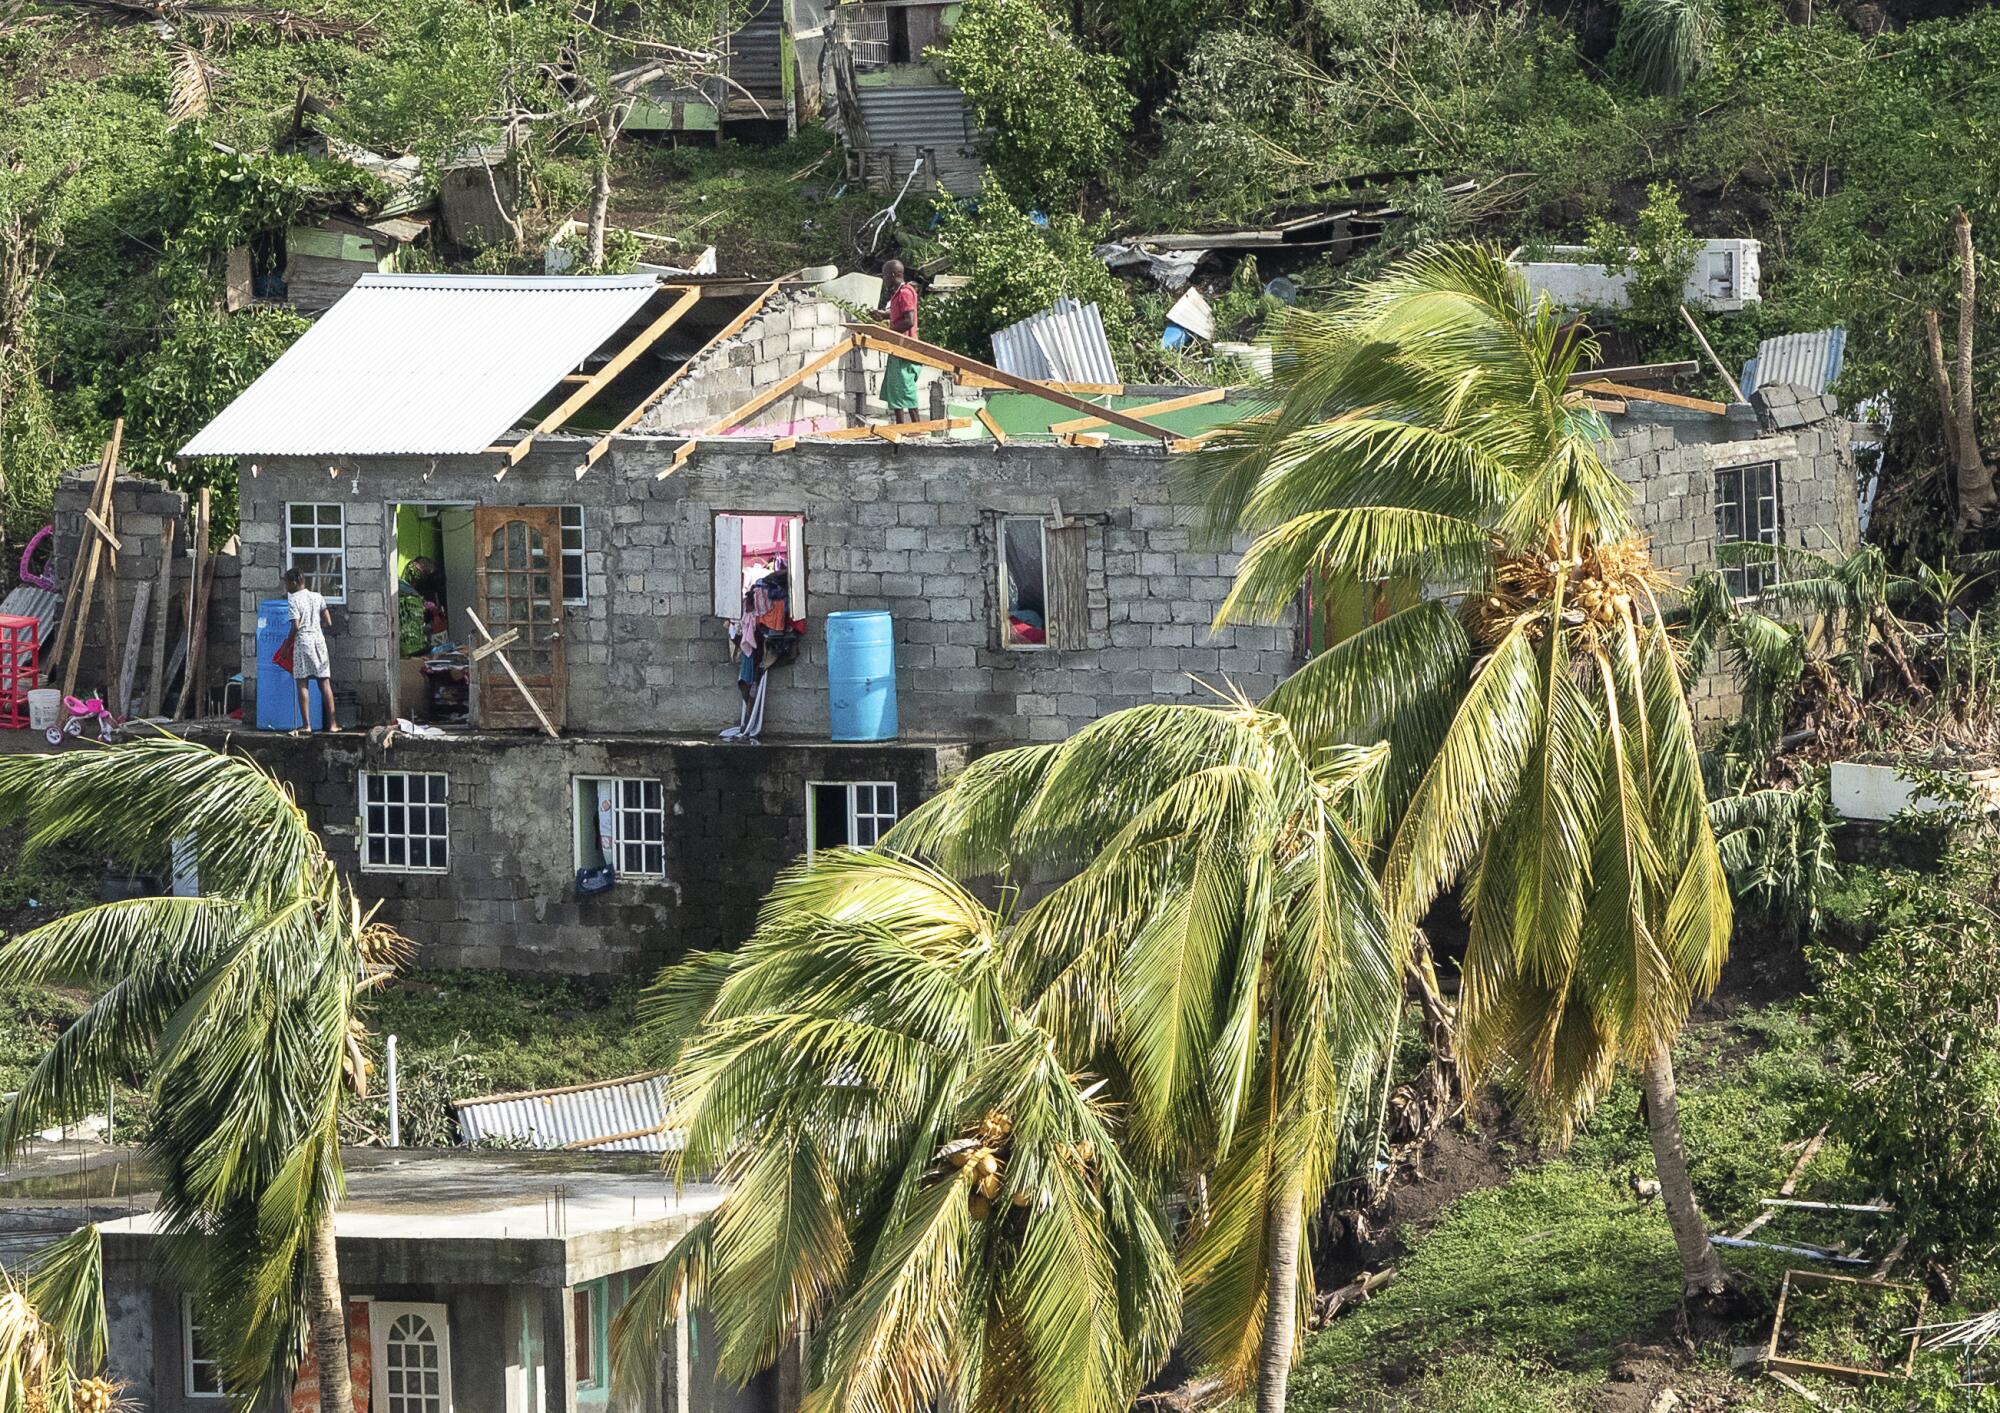 People working on the upper level of a home with a damaged roof, with palm trees blowing